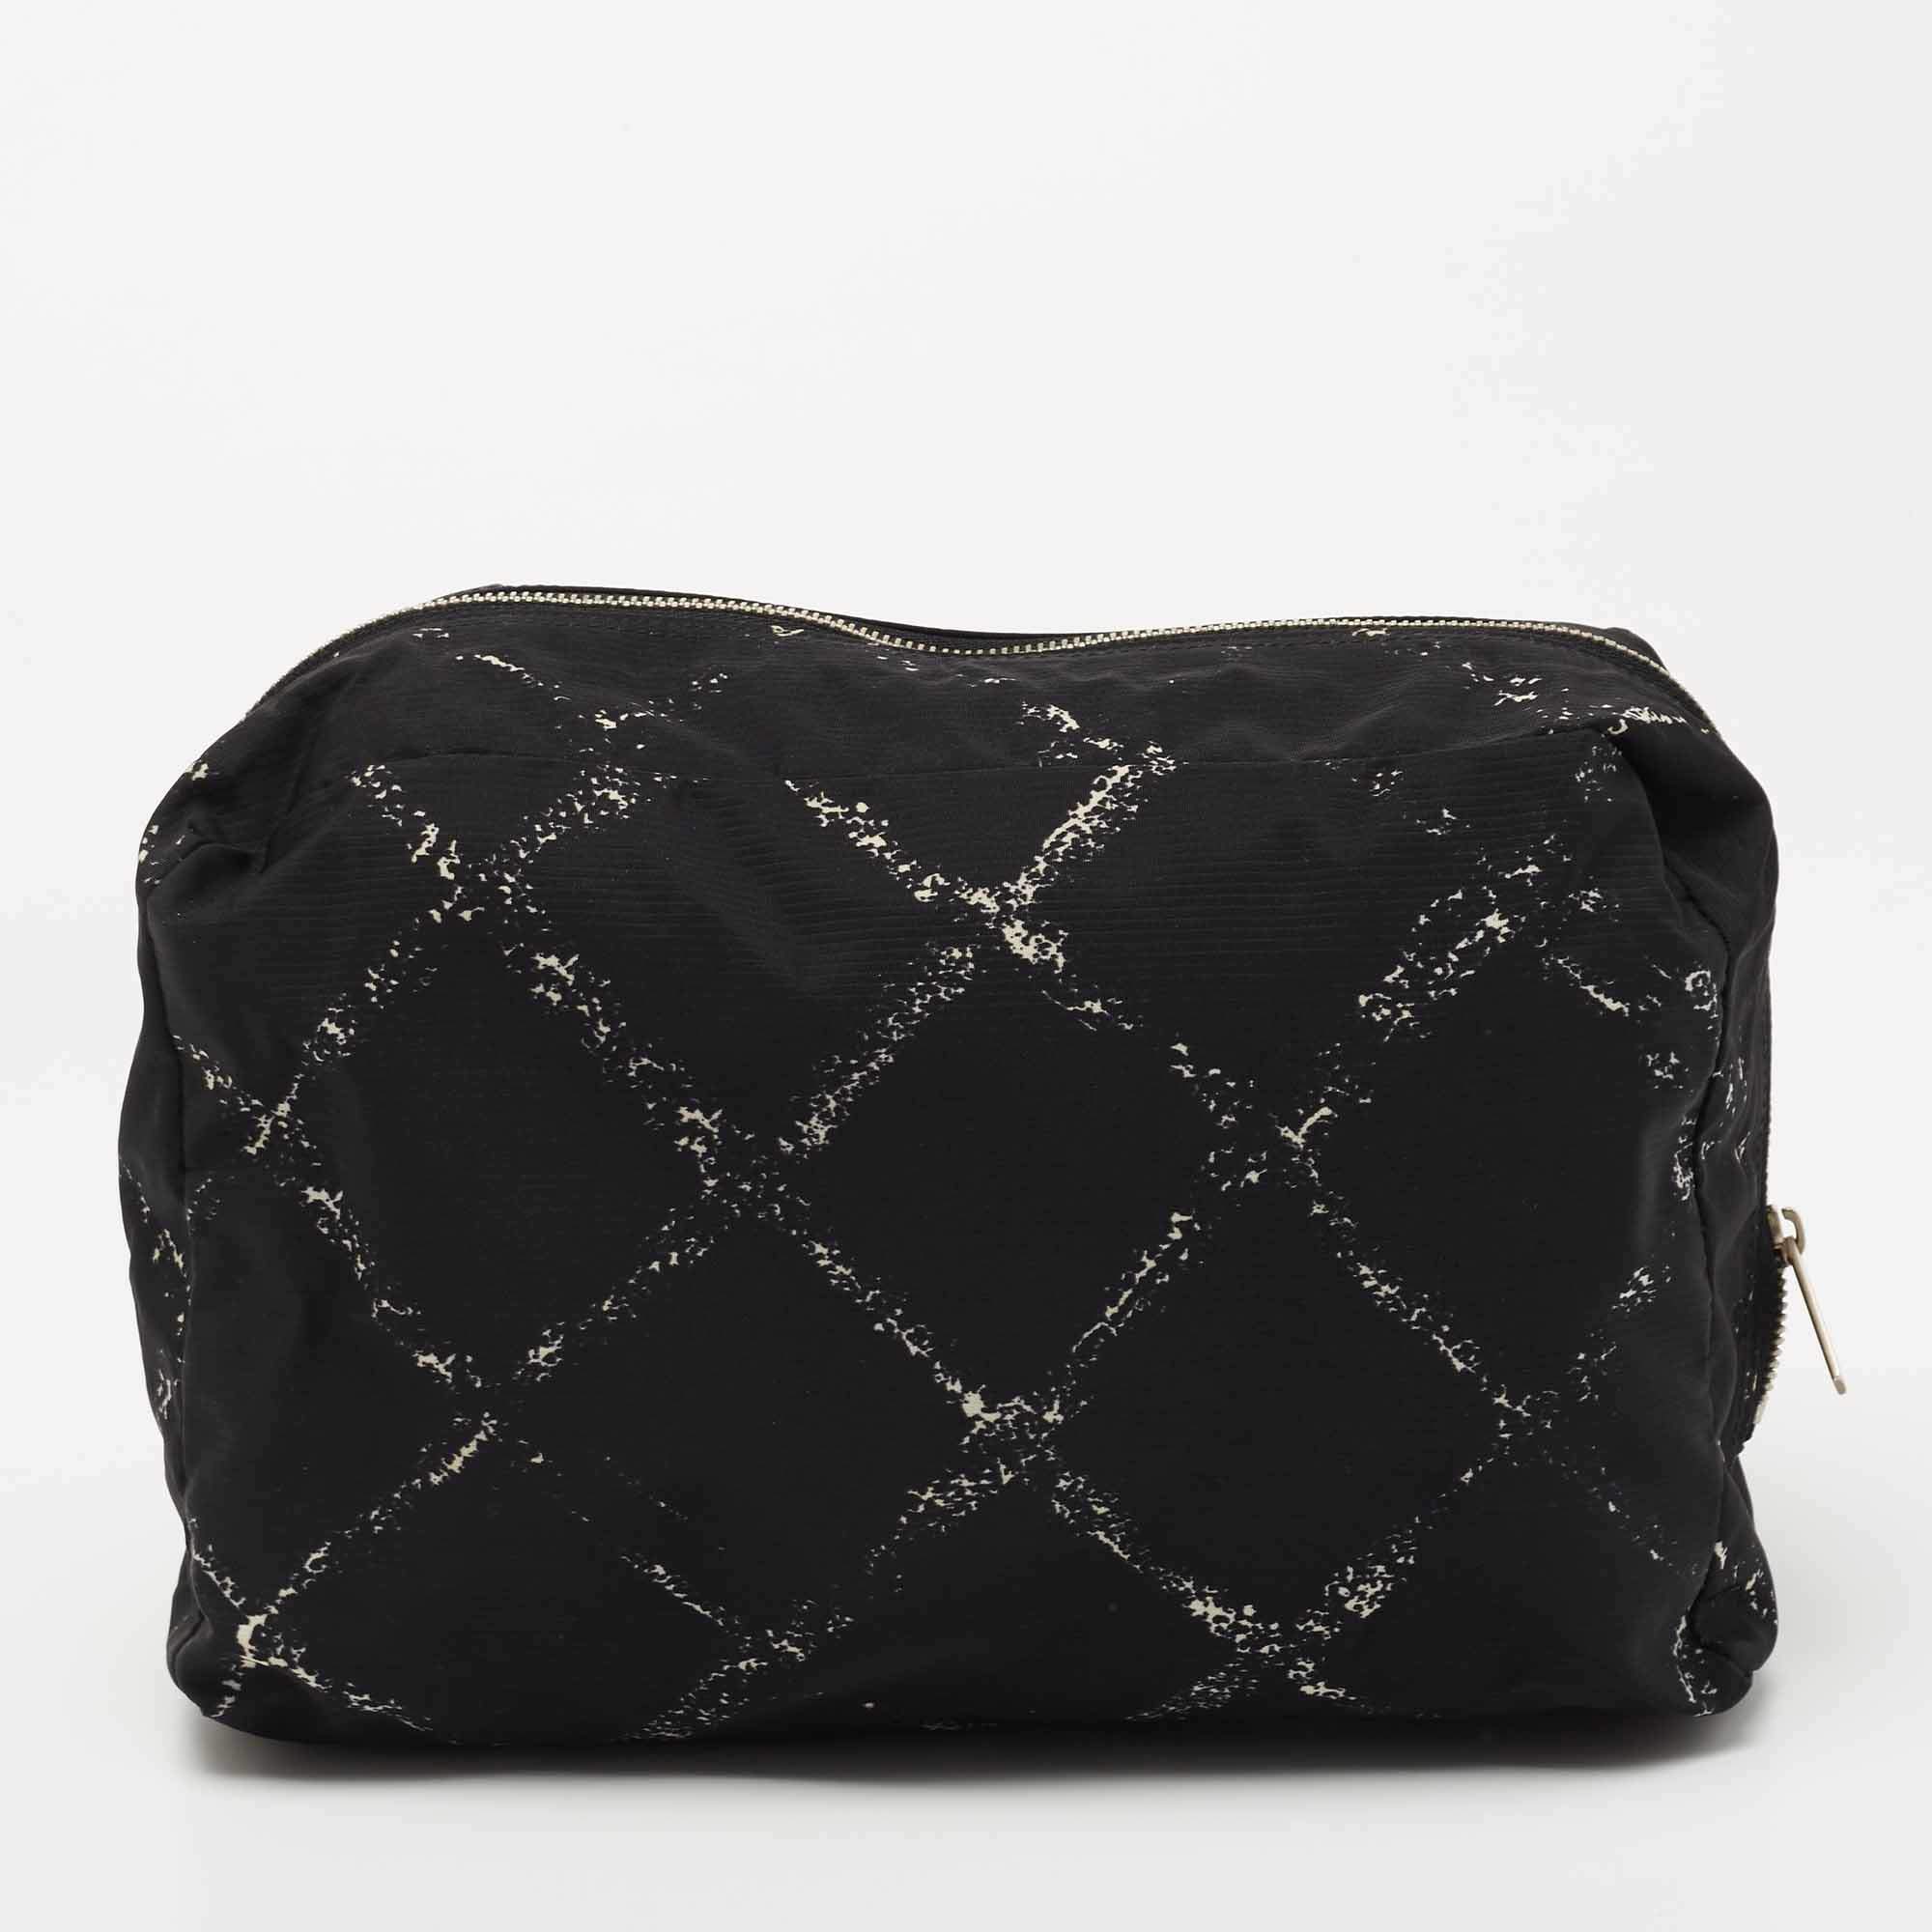 Chanel Black/White Quilted Print Nylon Travel Ligne Cosmetic Pouch Chanel